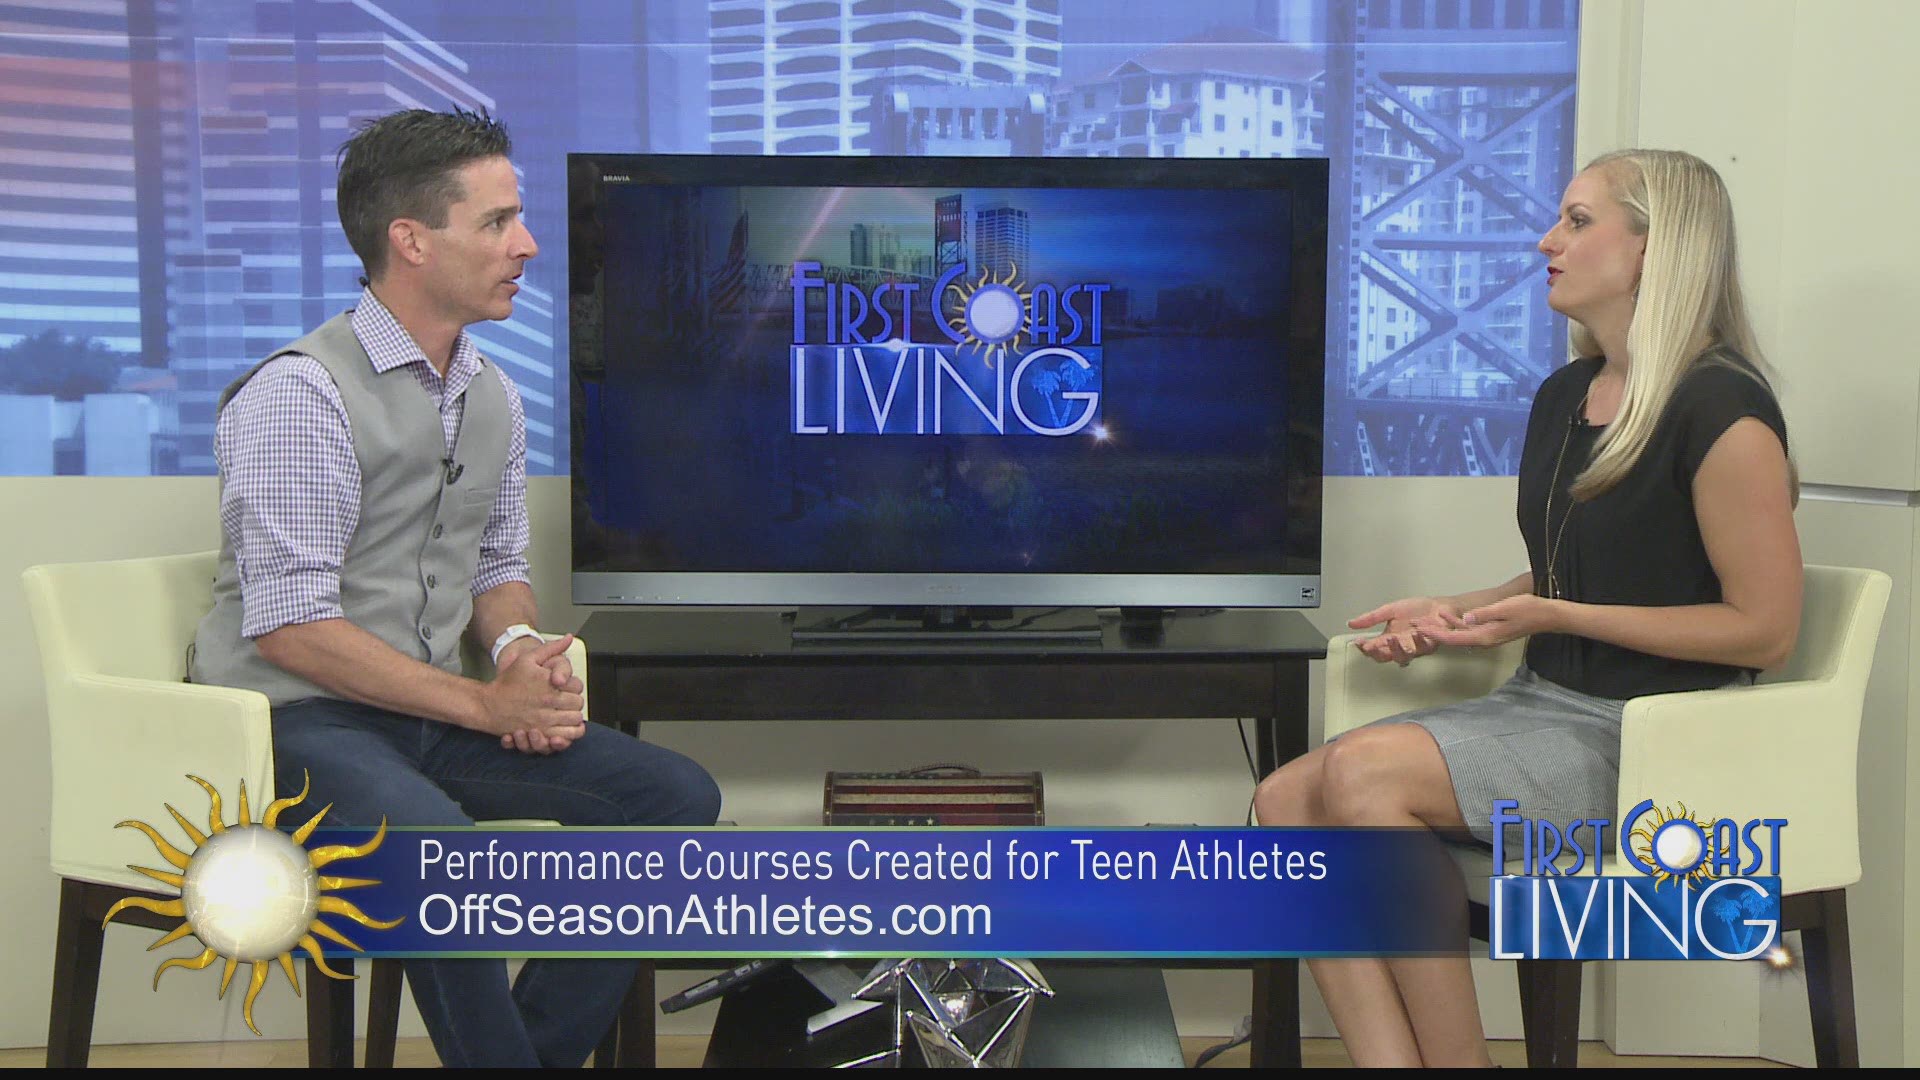 Jenna Braddock talks about courses for teen athletes.